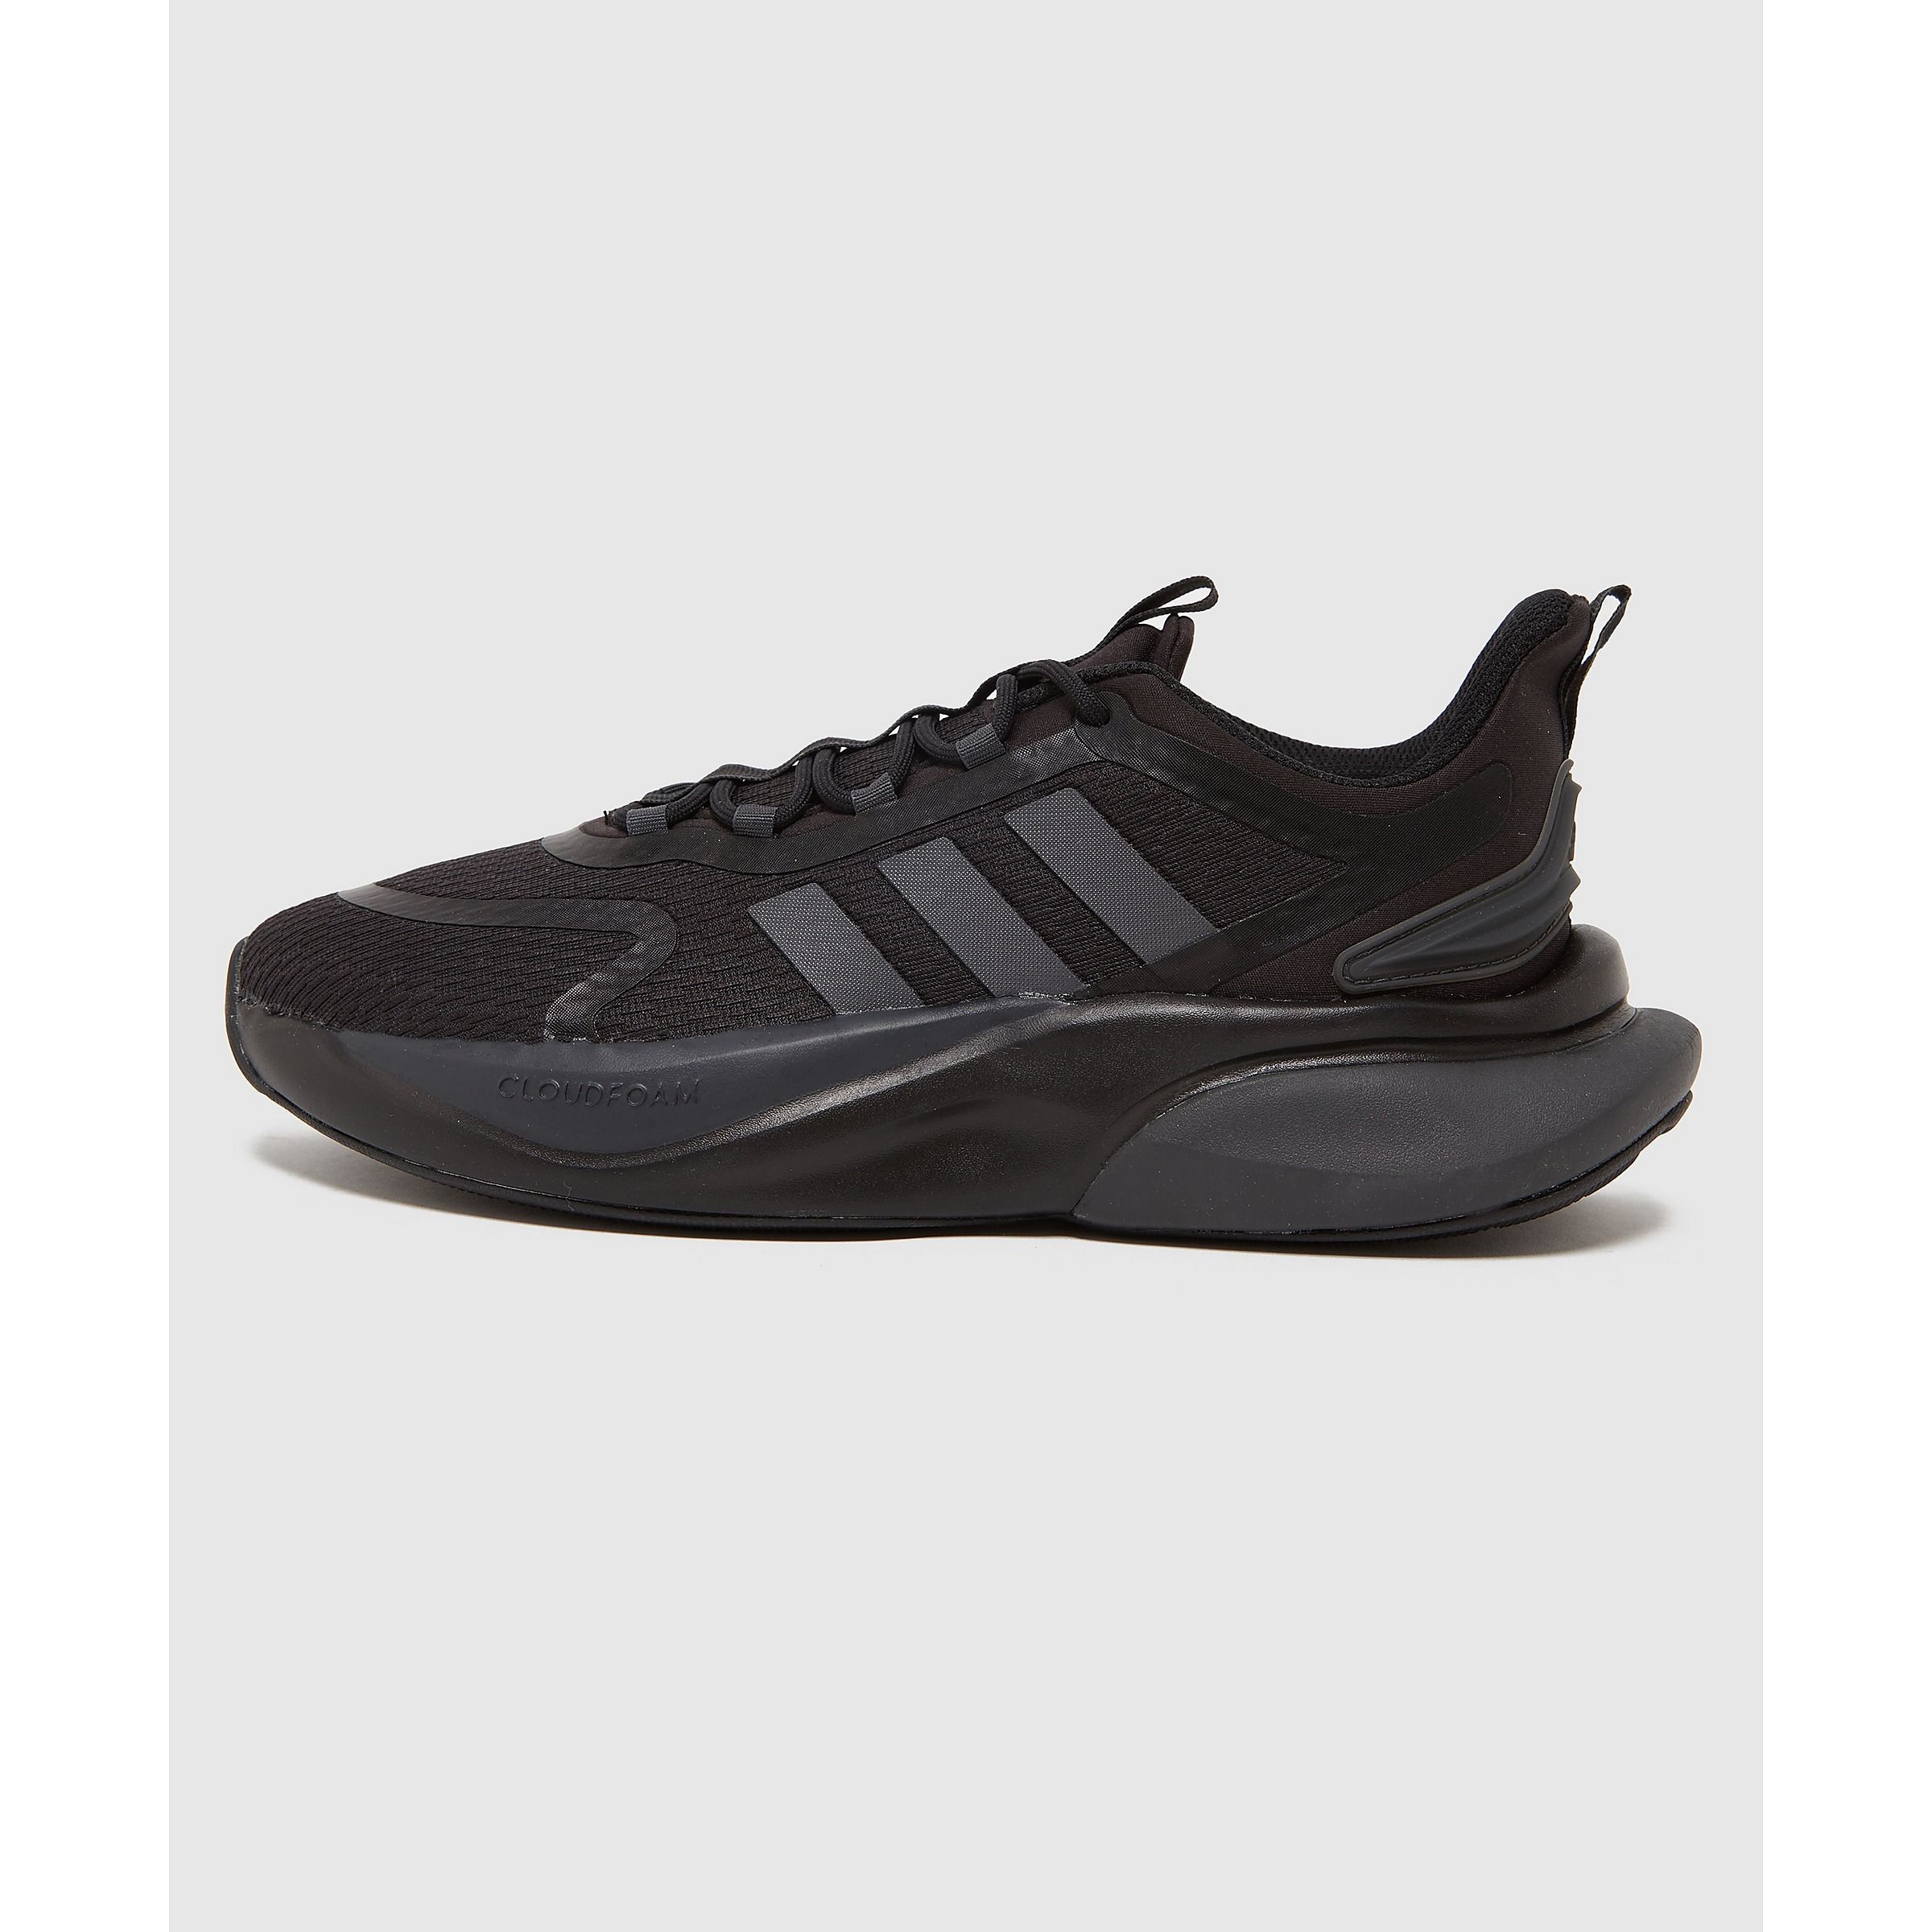 adidas Originals Mens Alphabounce+ Running Shoes in Black